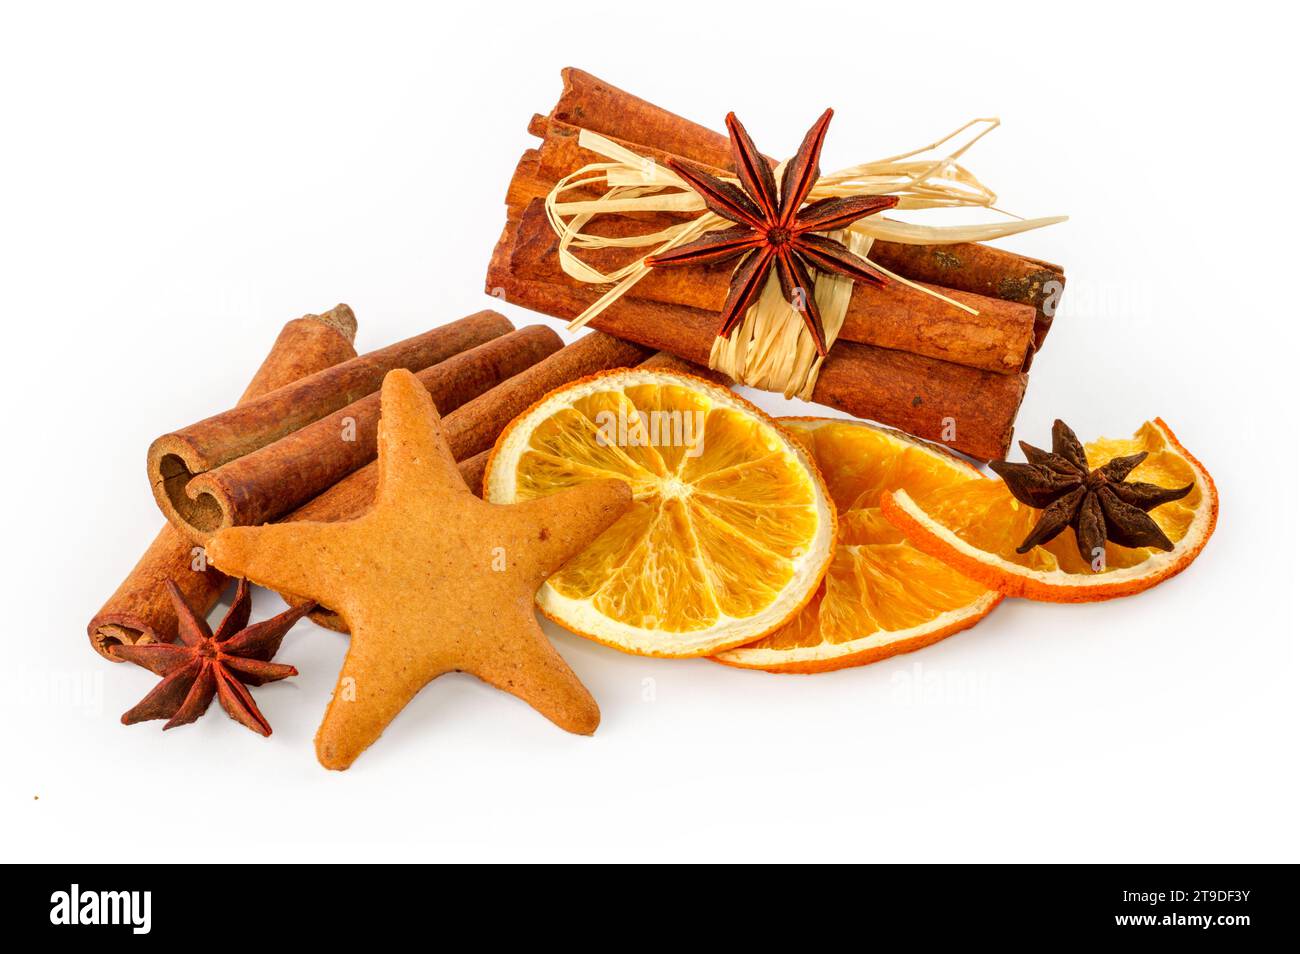 Dried oranges, star anise, cinnamon sticks and gingerbread, isolated on white background Stock Photo